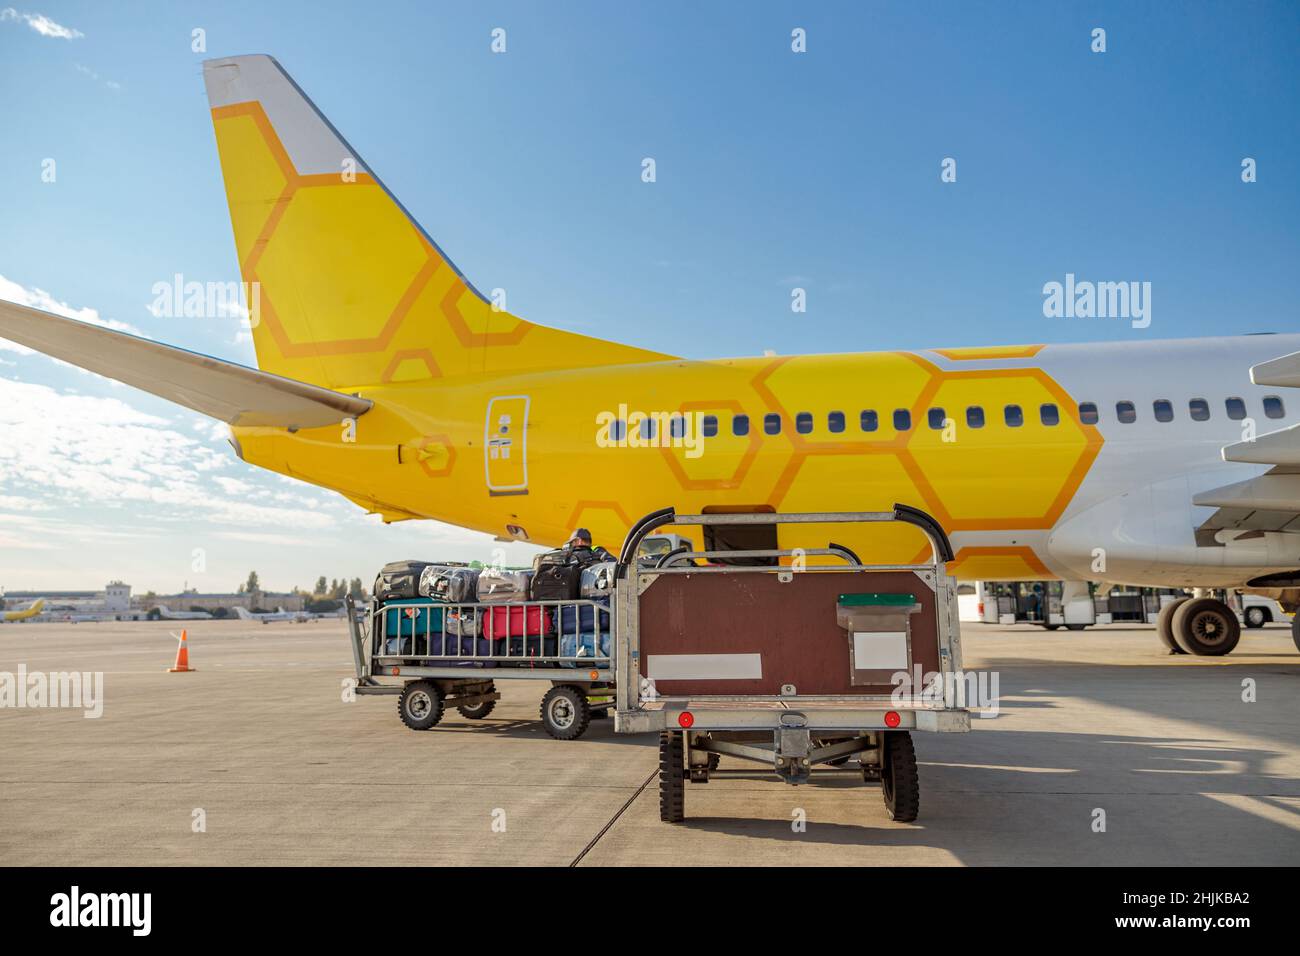 Yellow passenger airplane and baggage cart with travel bags under blue sky at airport Stock Photo